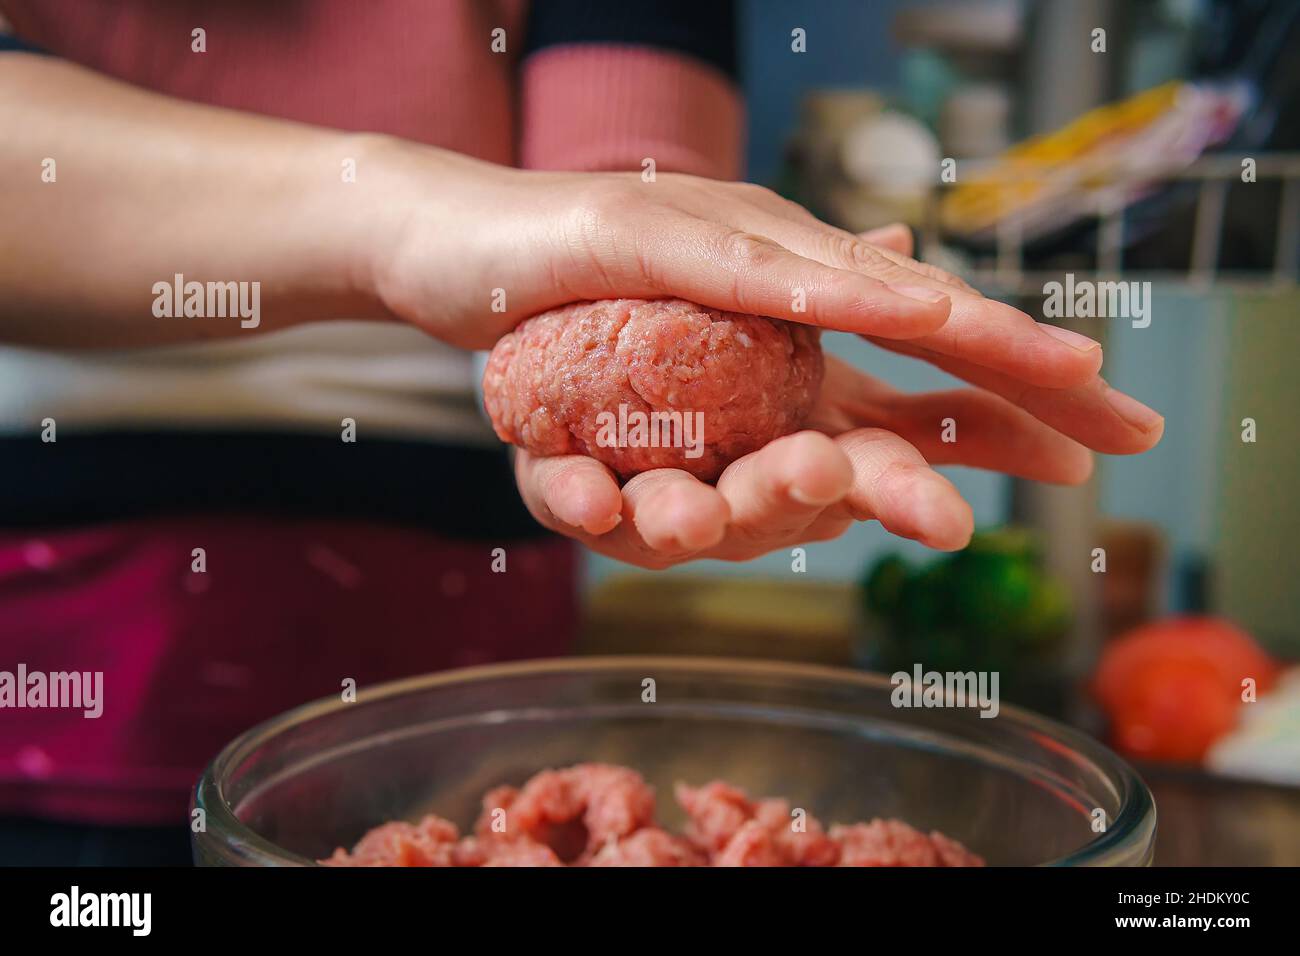 Close-up of a woman's hands preparing ground beef to make hamburgers, the meat is still raw and she is adding the ingredients, nice atmosphere in the Stock Photo